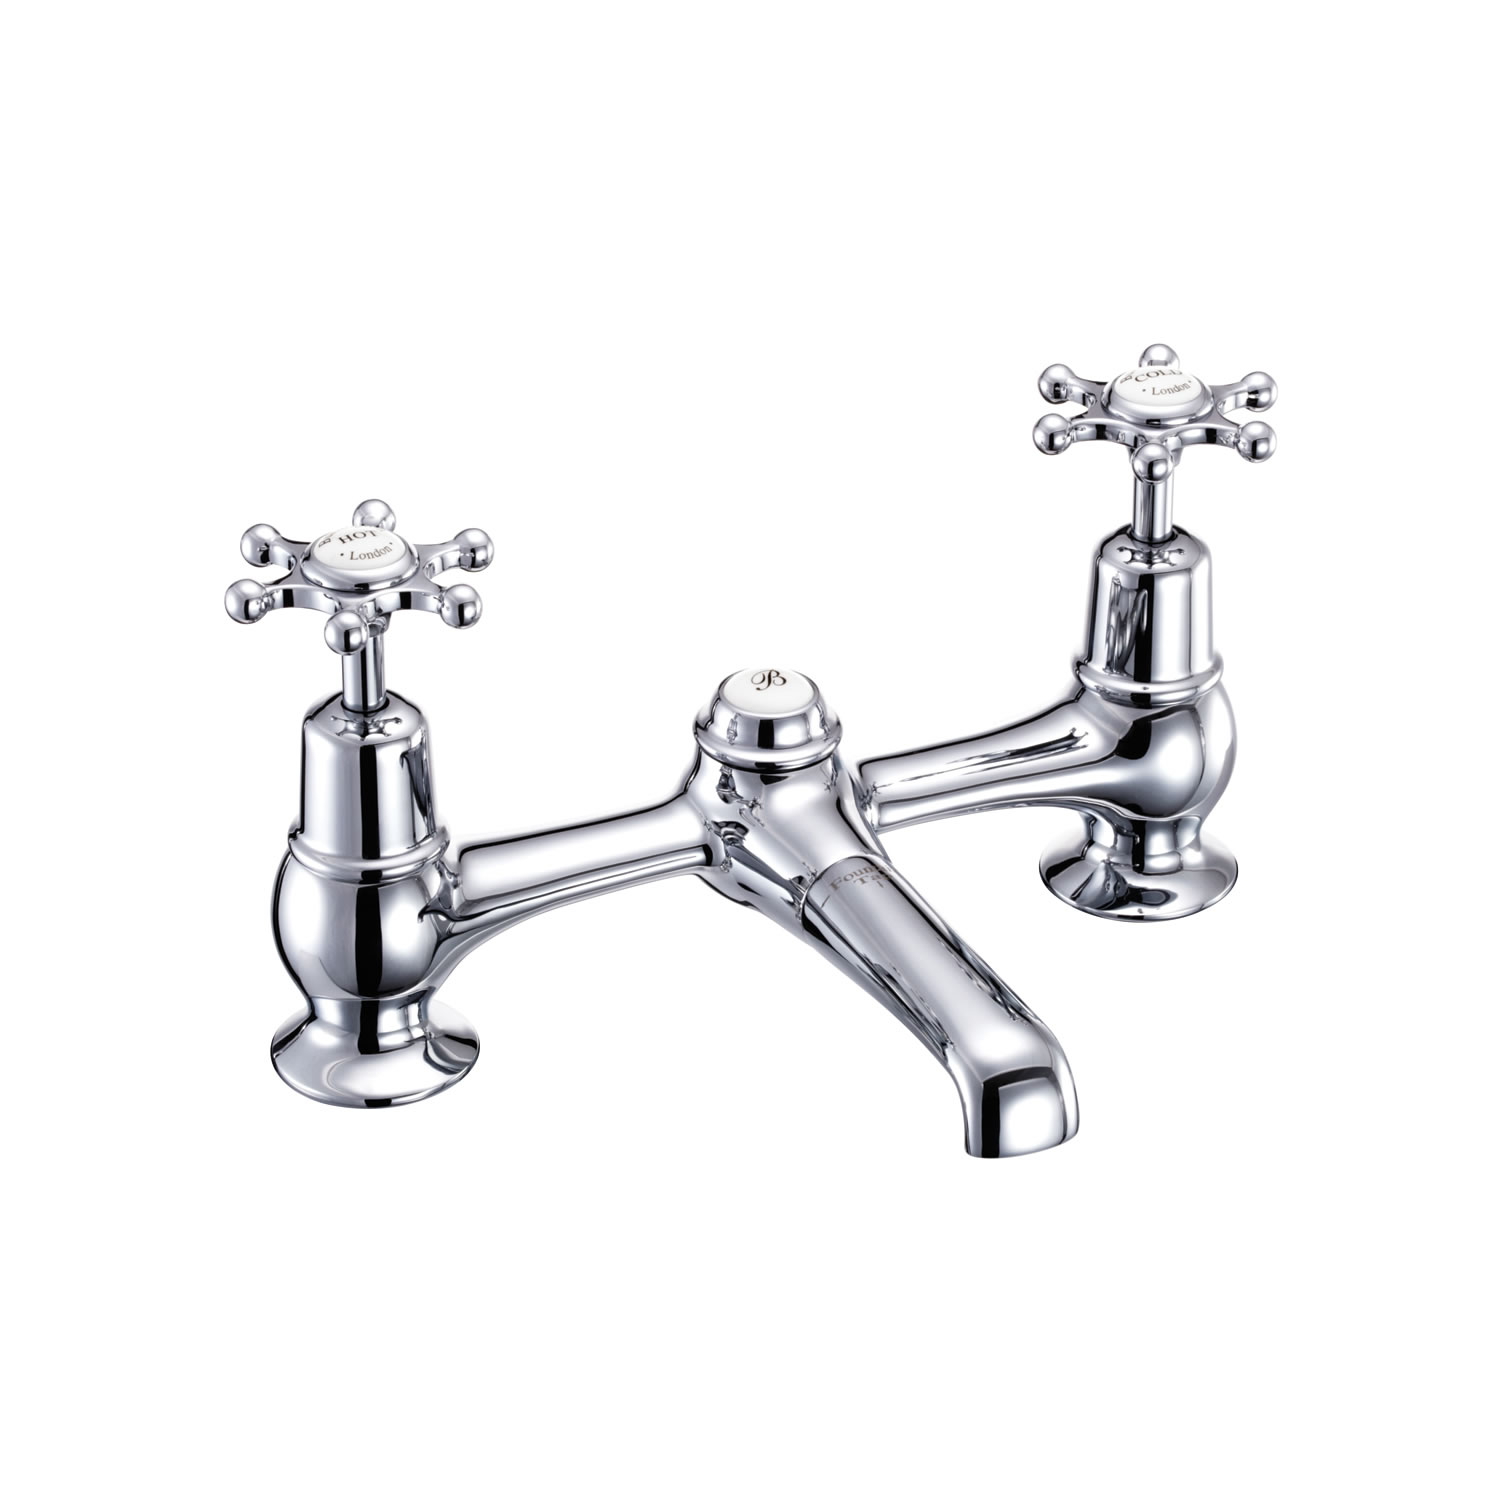 Birkenhead 2 tap hole bridge basin mixer with low central indice with plug and chain waste with swivel spout